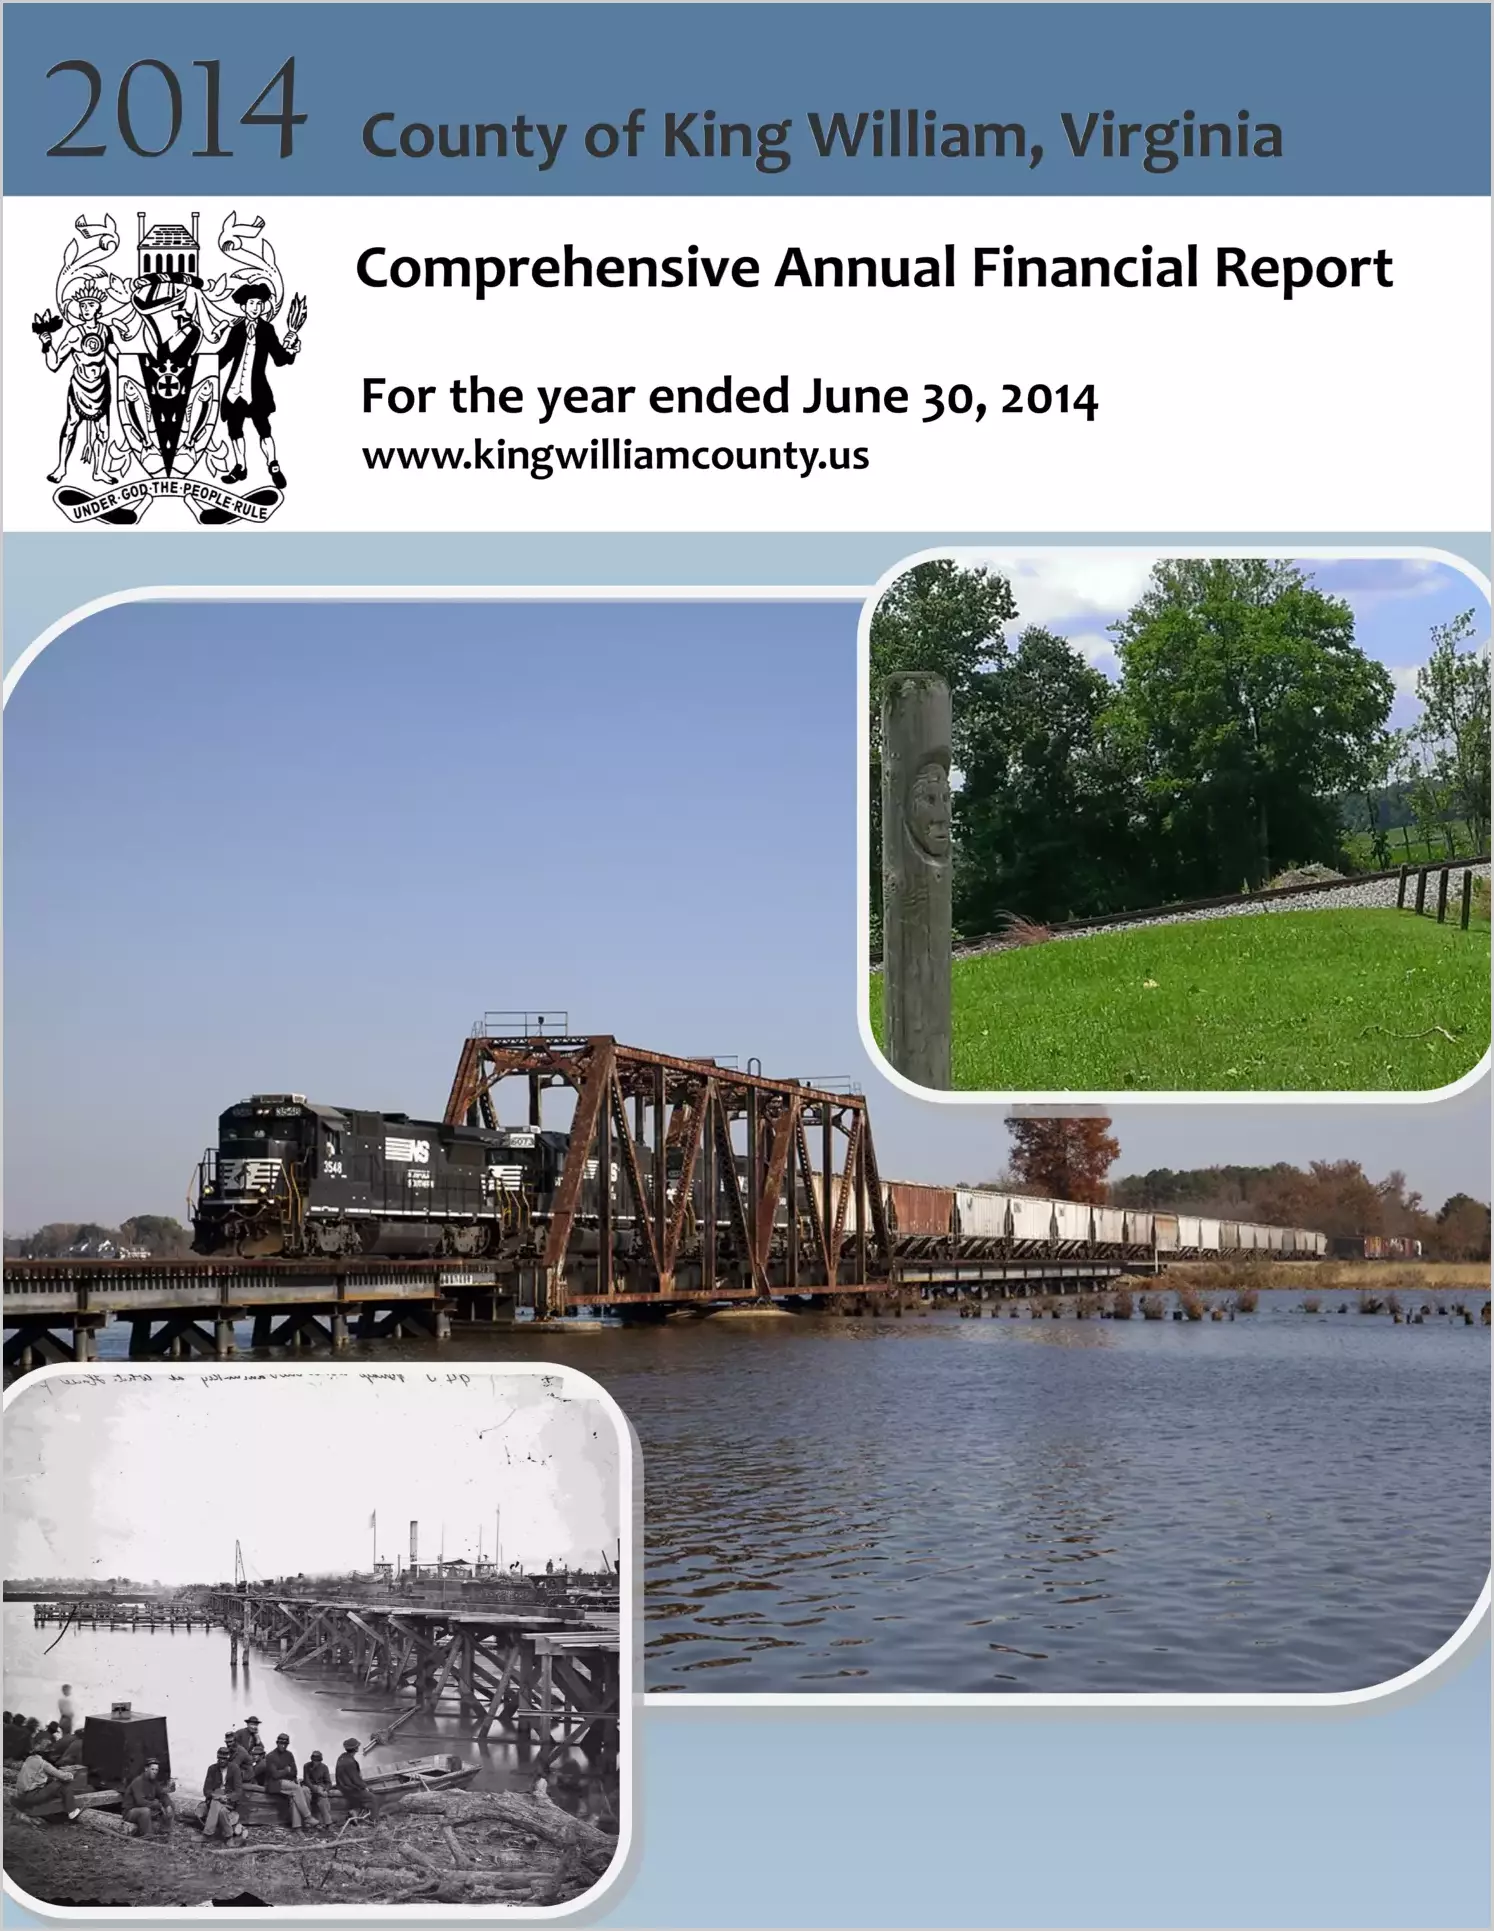 2014 Annual Financial Report for County of King William